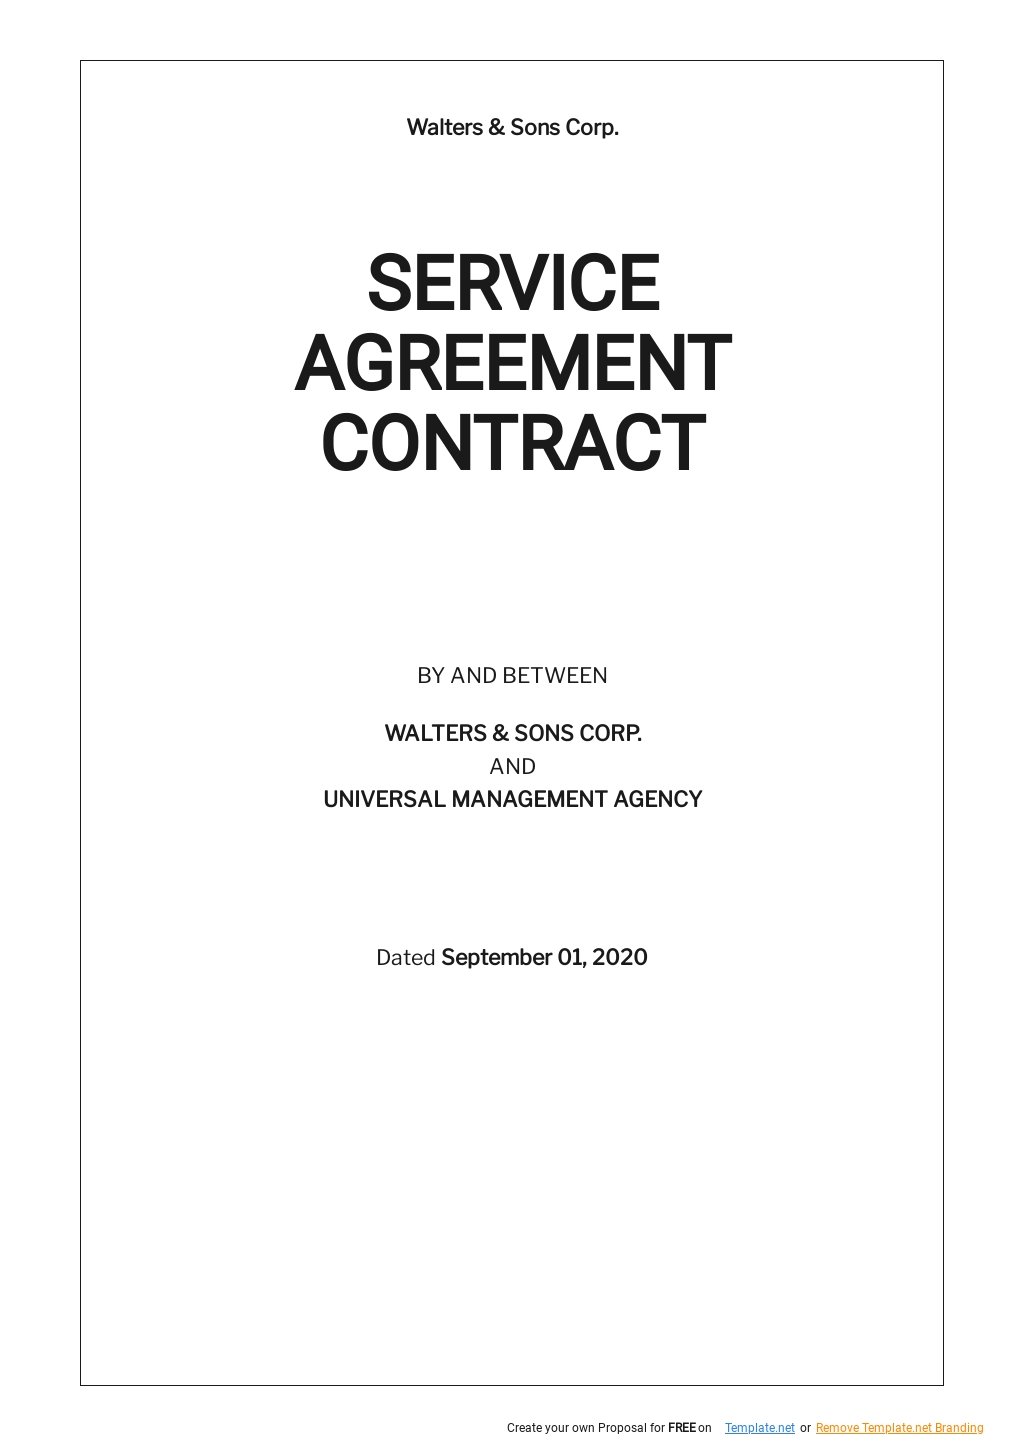 FREE Contract Agreement Templates in Microsoft Word (DOC)